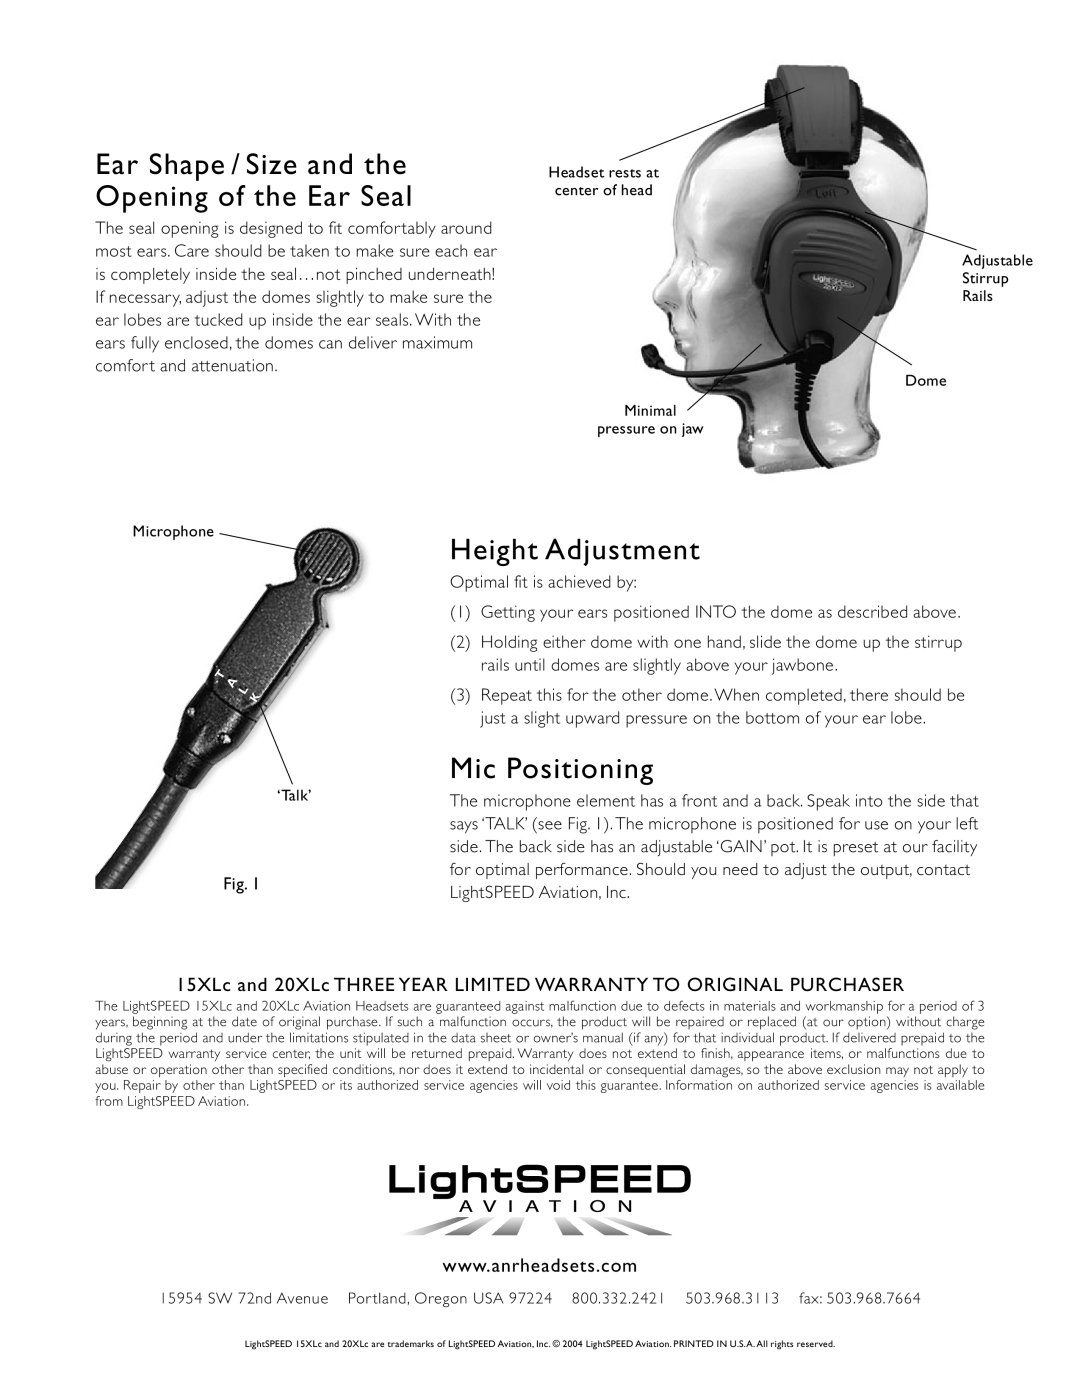 LightSpeed Technologies 20XLc, 15XLc Height Adjustment, Mic Positioning, Ear Shape / Size and the Opening of the Ear Seal 